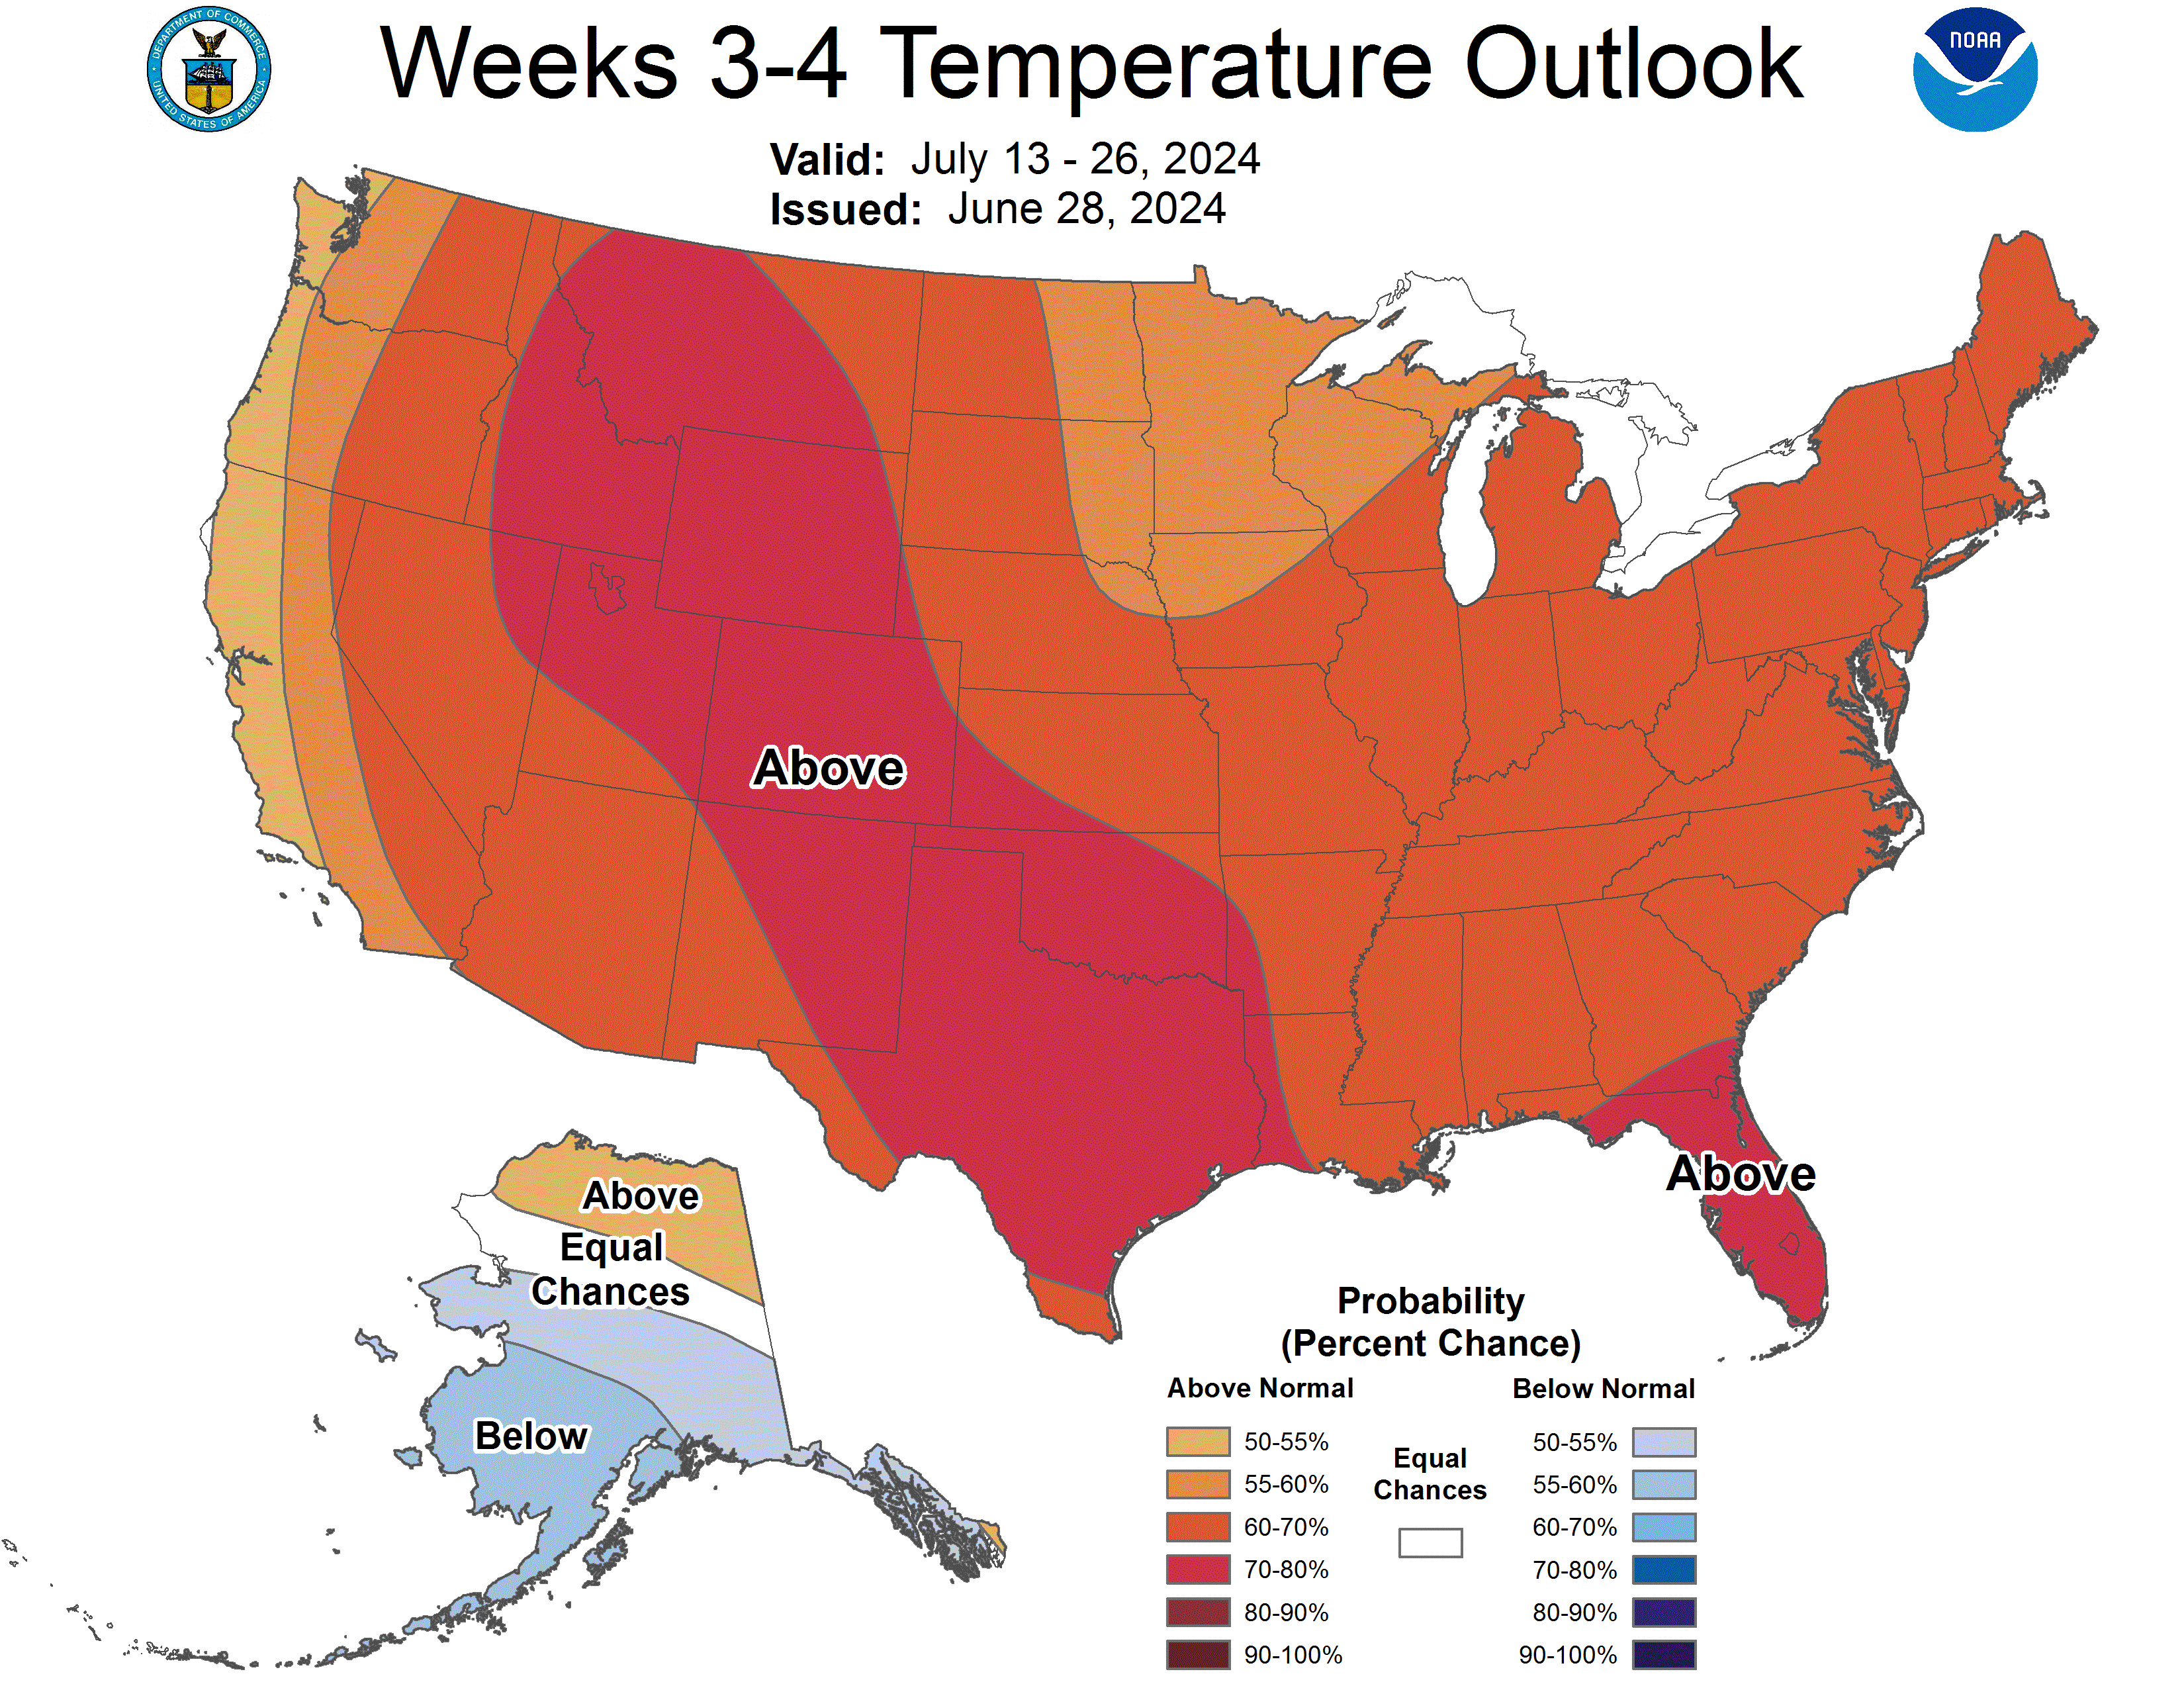 http://www.cpc.ncep.noaa.gov/products/predictions/WK34/gifs/WK34temp.gif